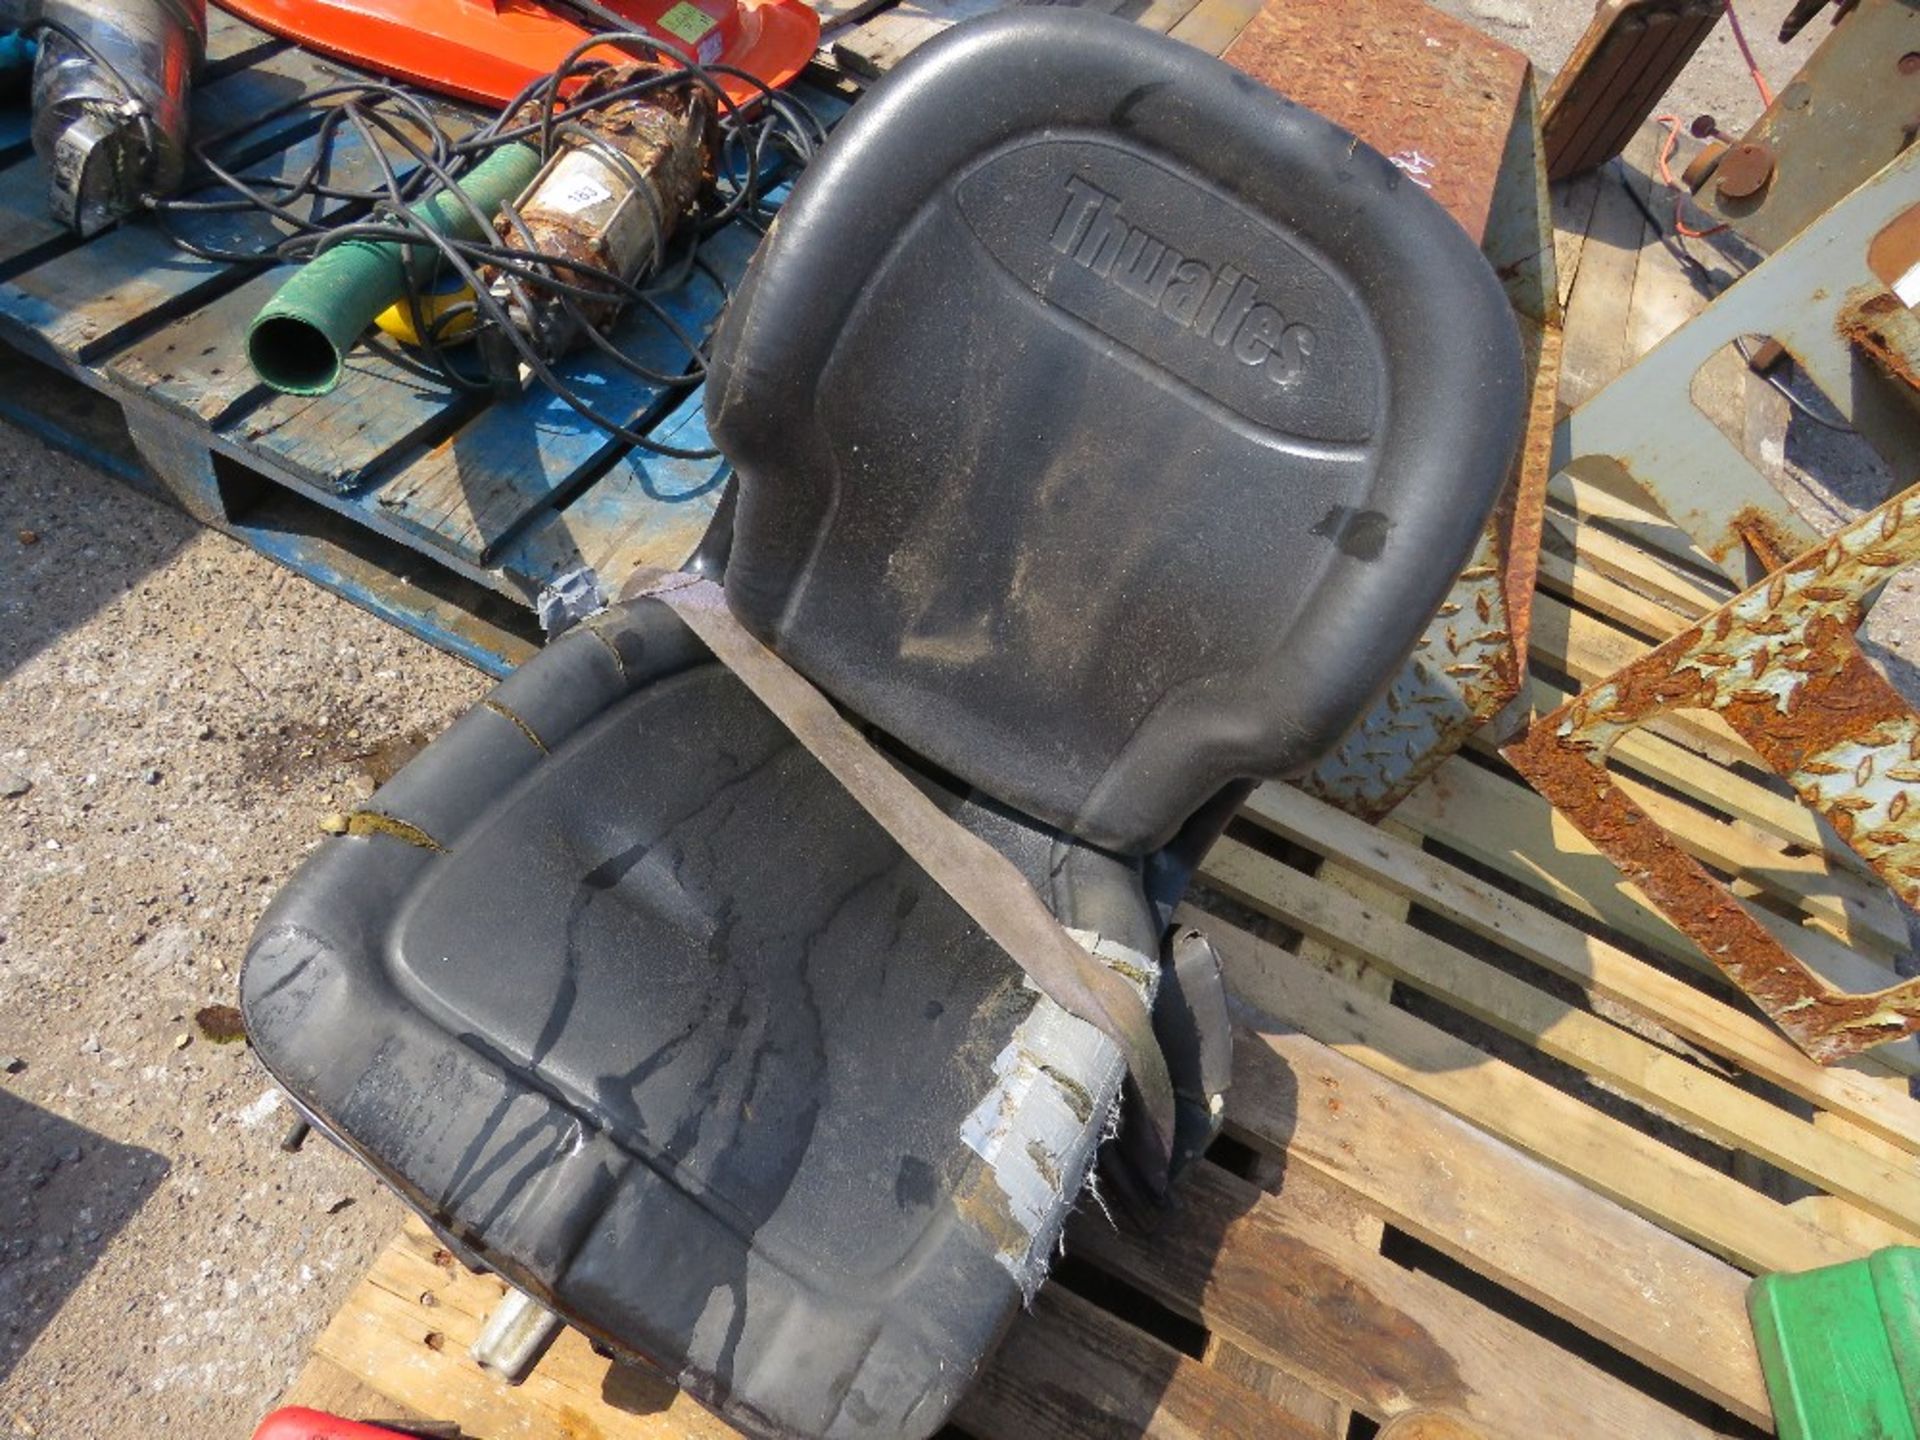 MACHINE SEAT PLUS FUEL CANS. - Image 5 of 5